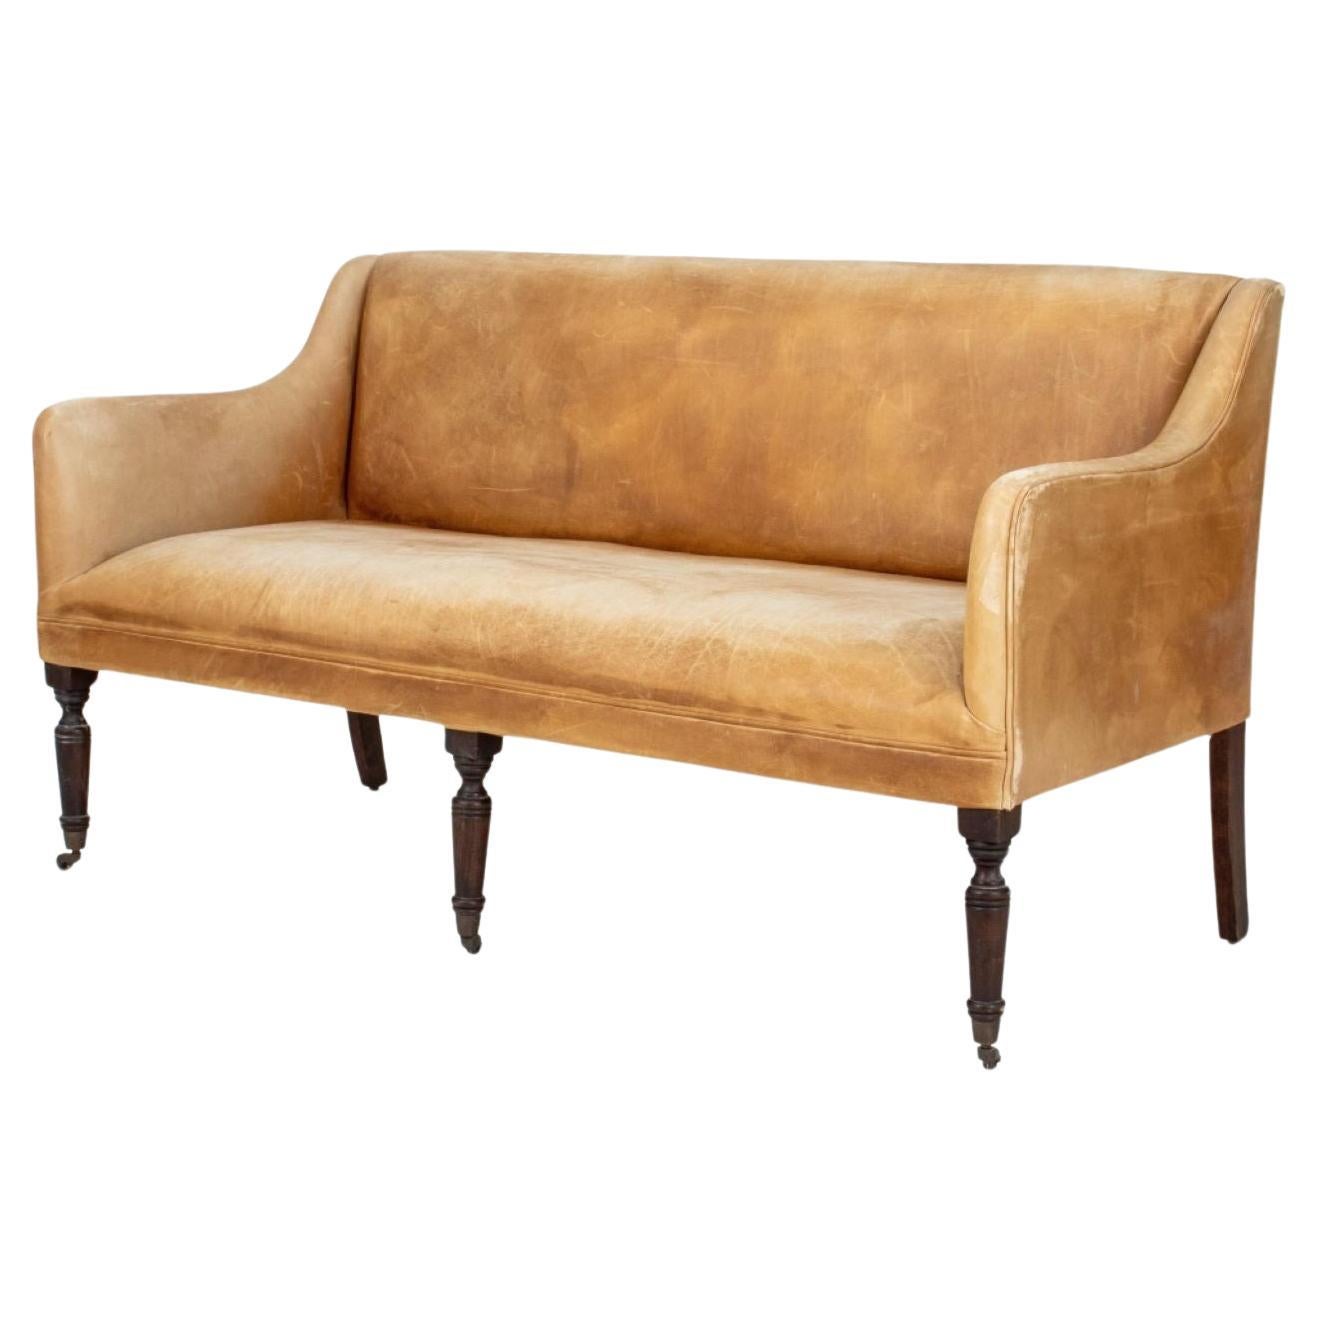 Regency Style Leather Upholstered Sofa For Sale